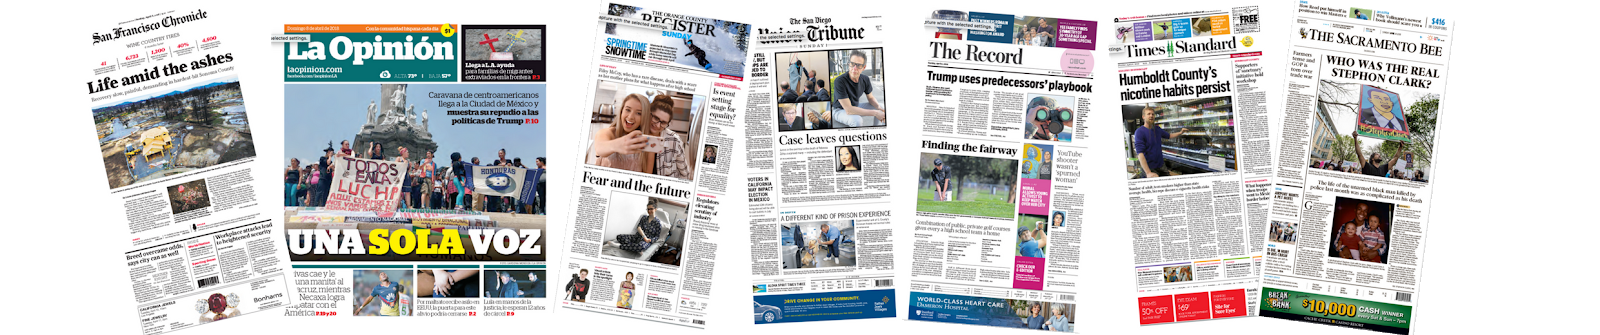 Example of different heading types on typical newspapers and articles